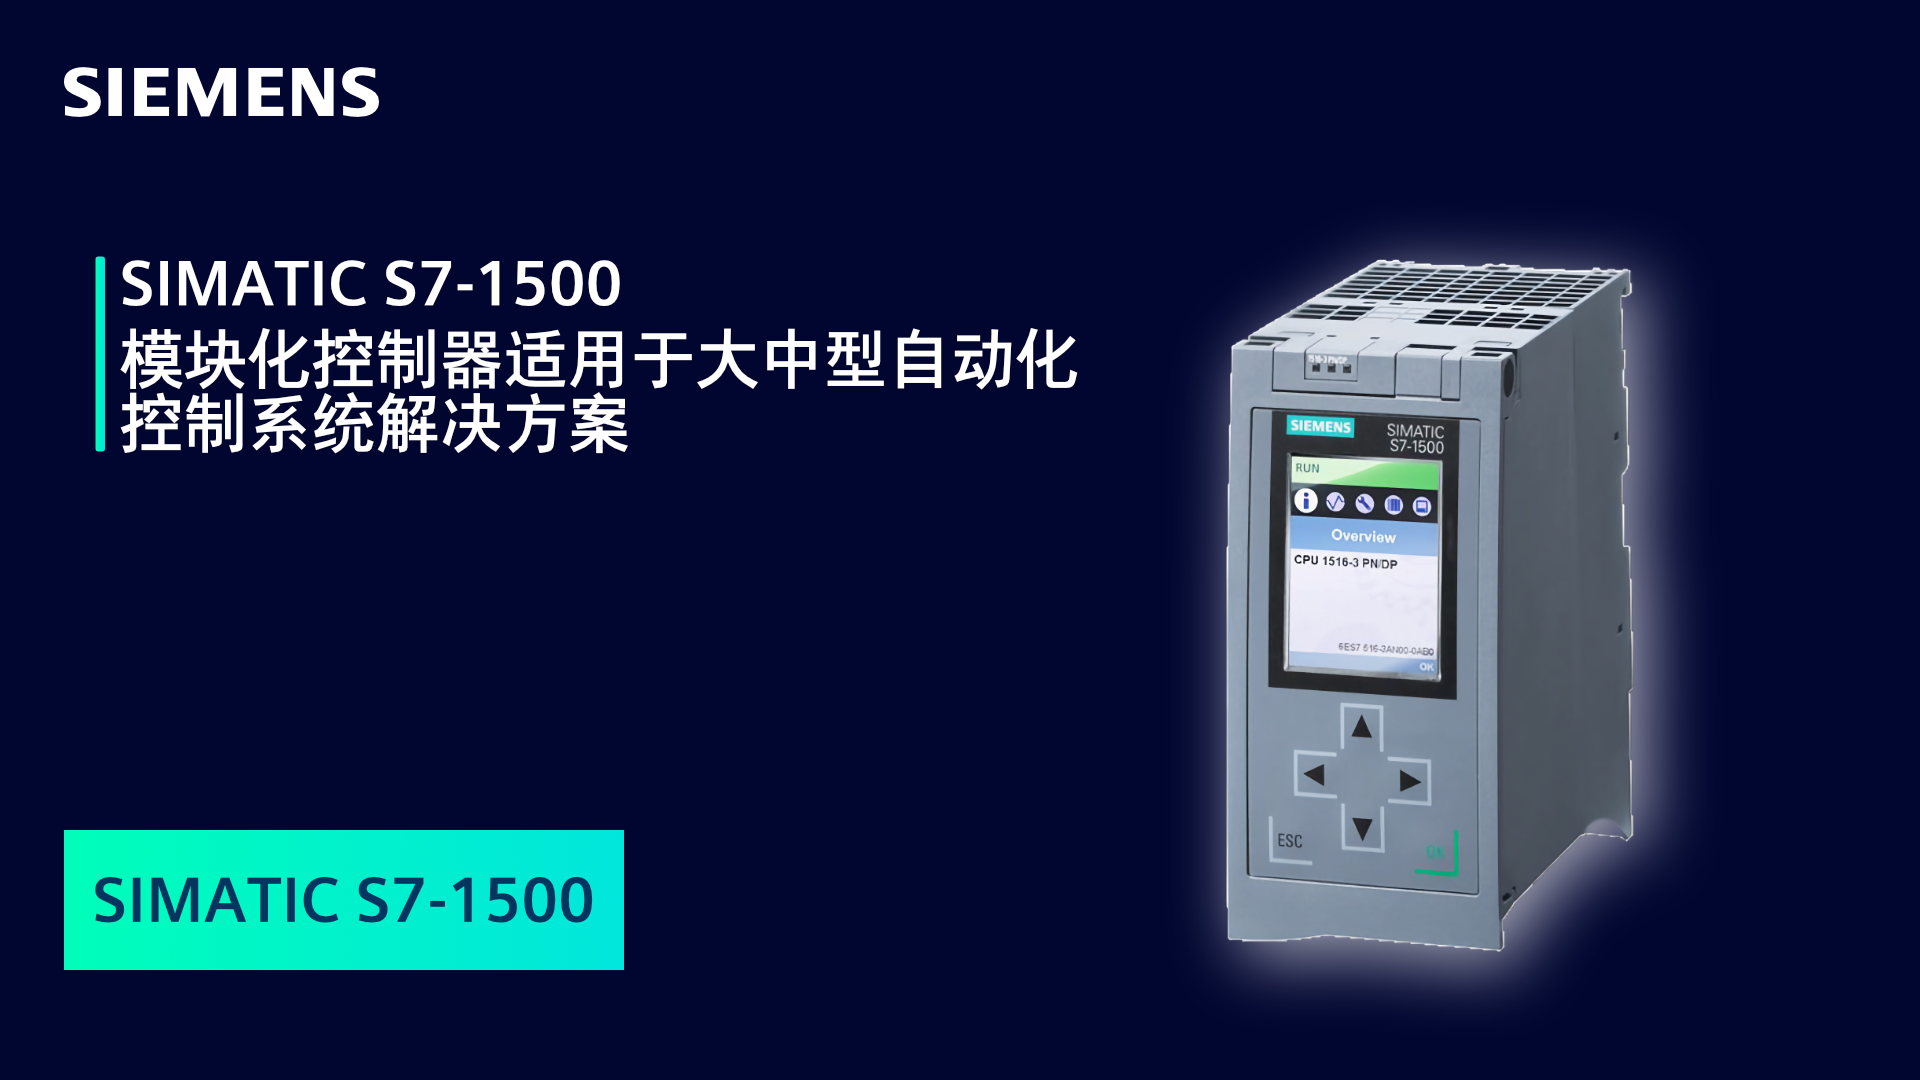 SIMATIC S7-1500T(DT)